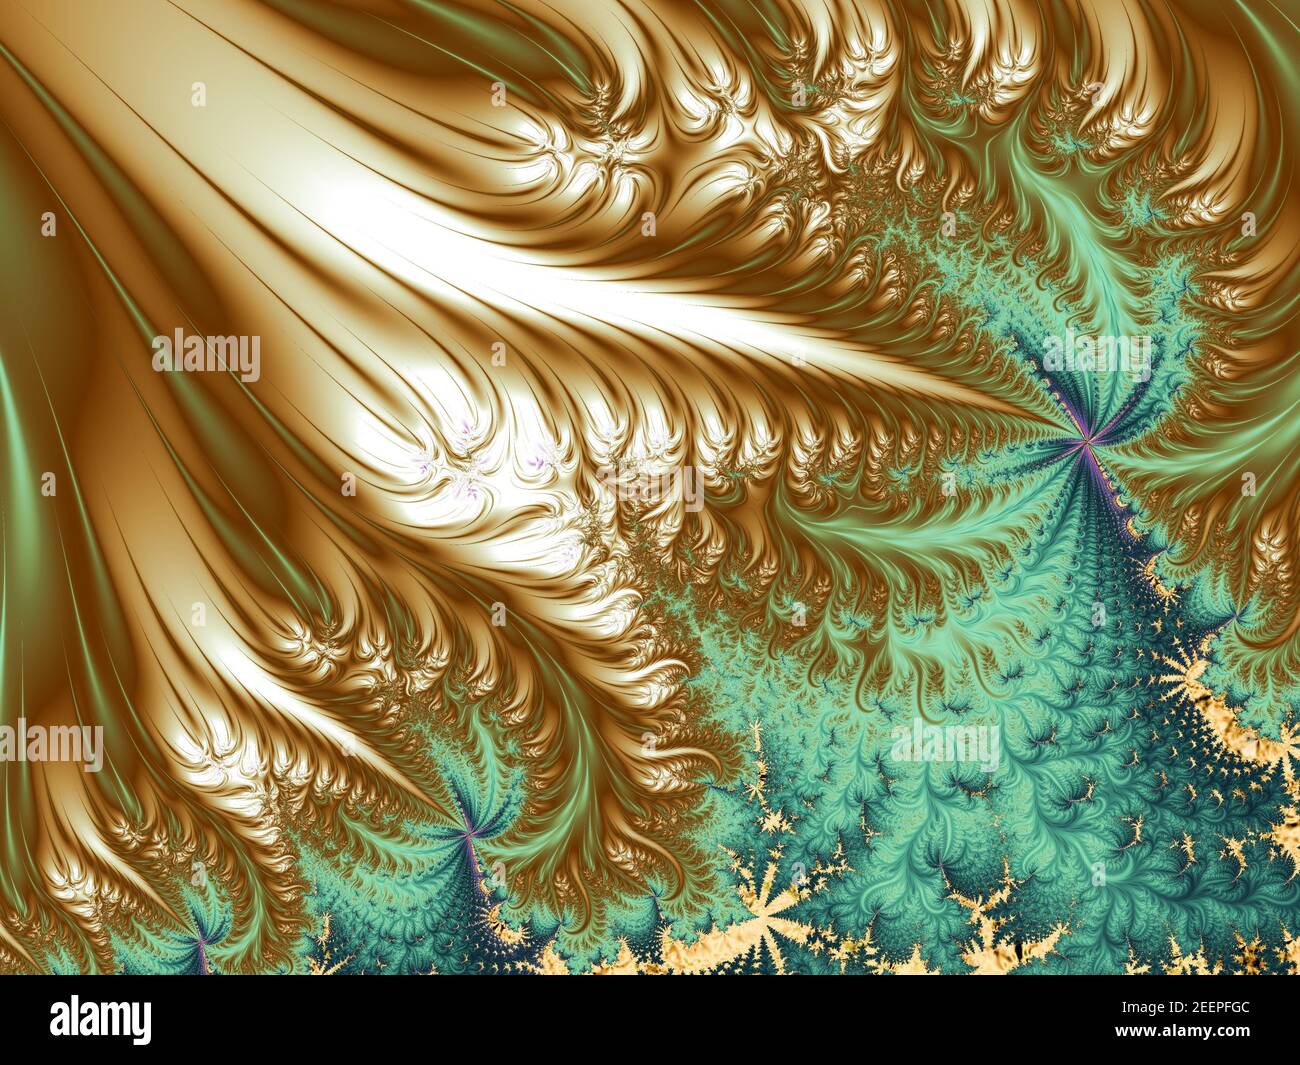 376881 fractal spiral bright patterns 4k  Rare Gallery HD Wallpapers